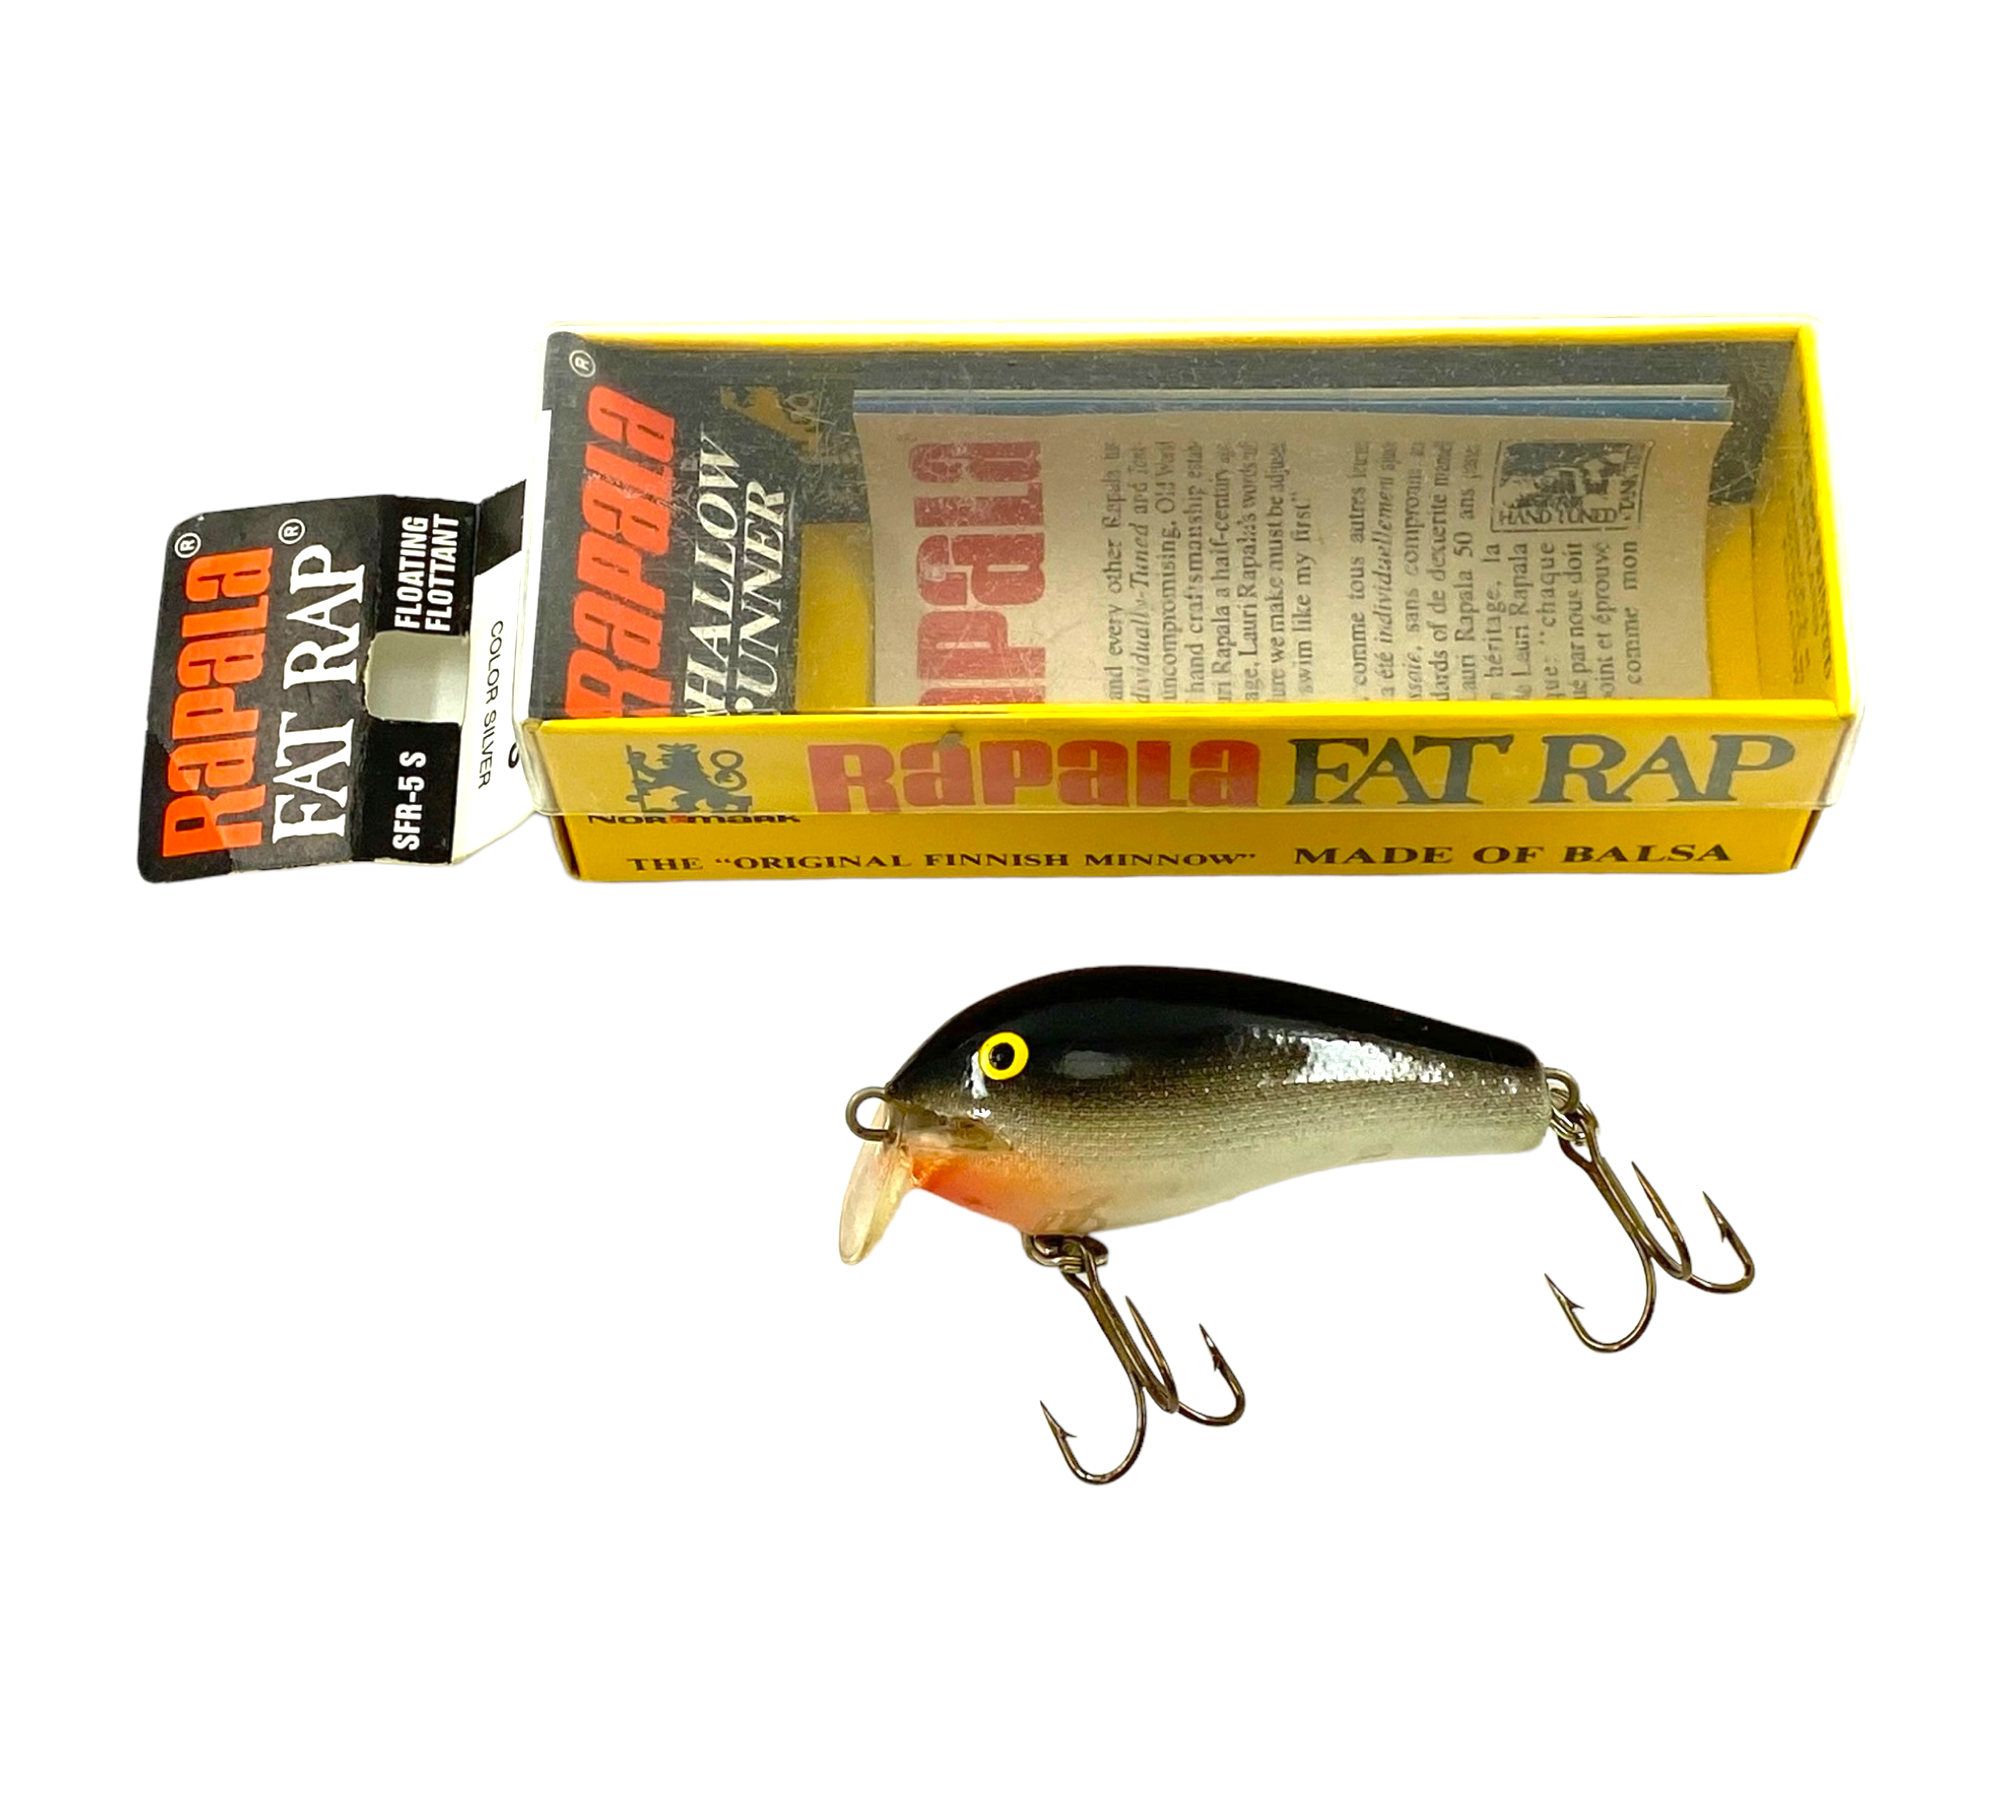 Finland • RAPALA LURES FAT RAP Size 5 Fishing Lure — SILVER – Toad